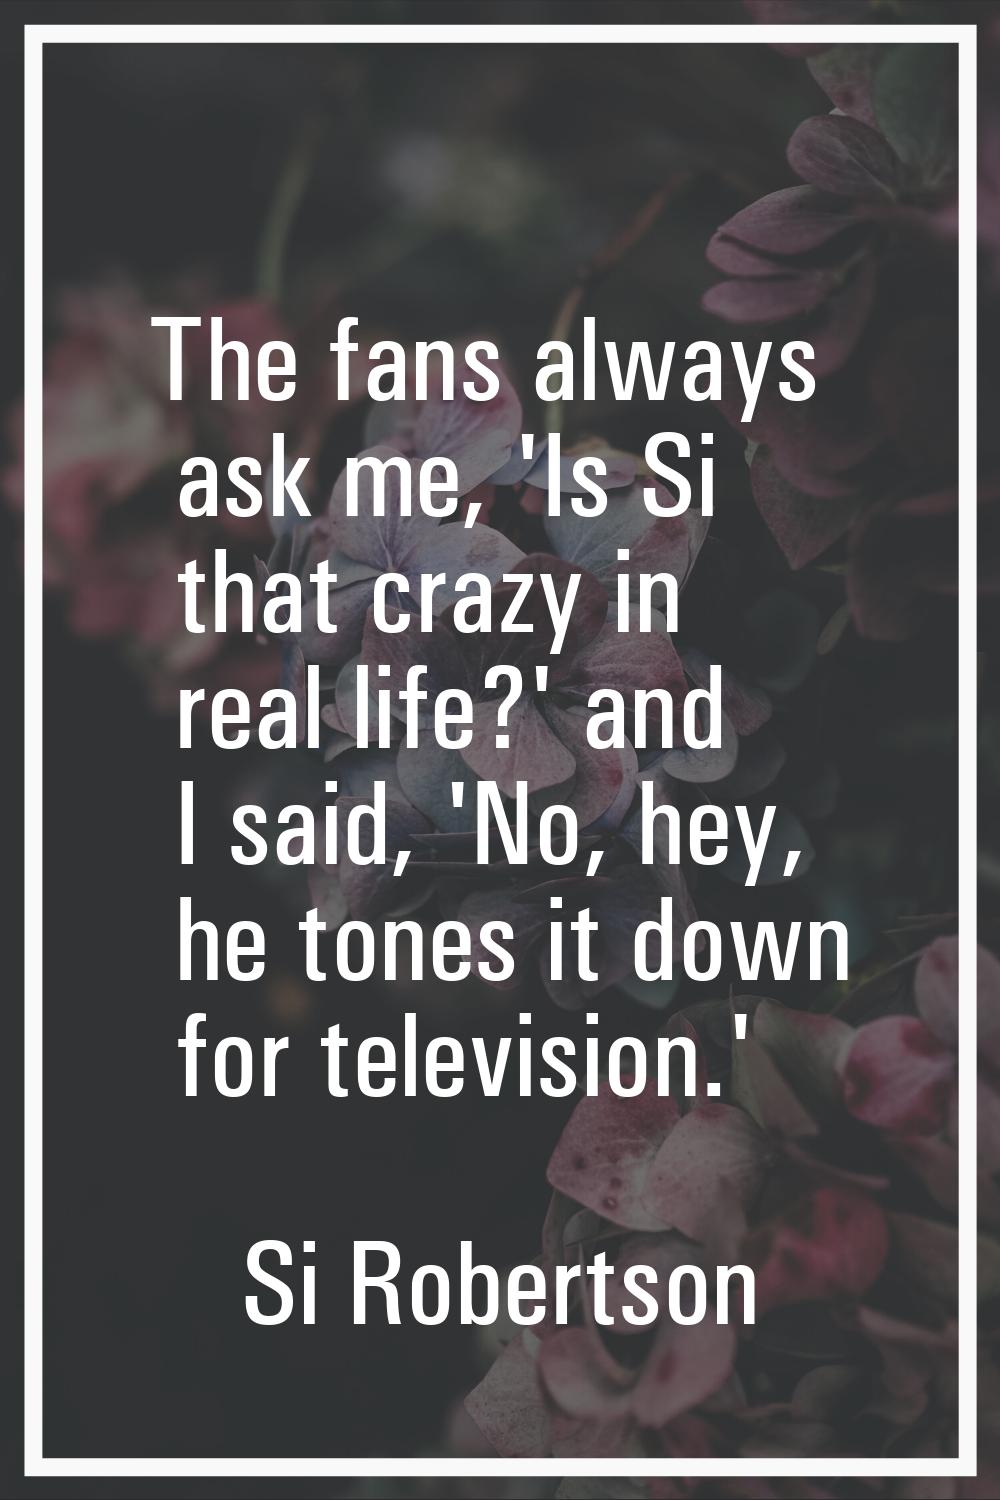 The fans always ask me, 'Is Si that crazy in real life?' and I said, 'No, hey, he tones it down for